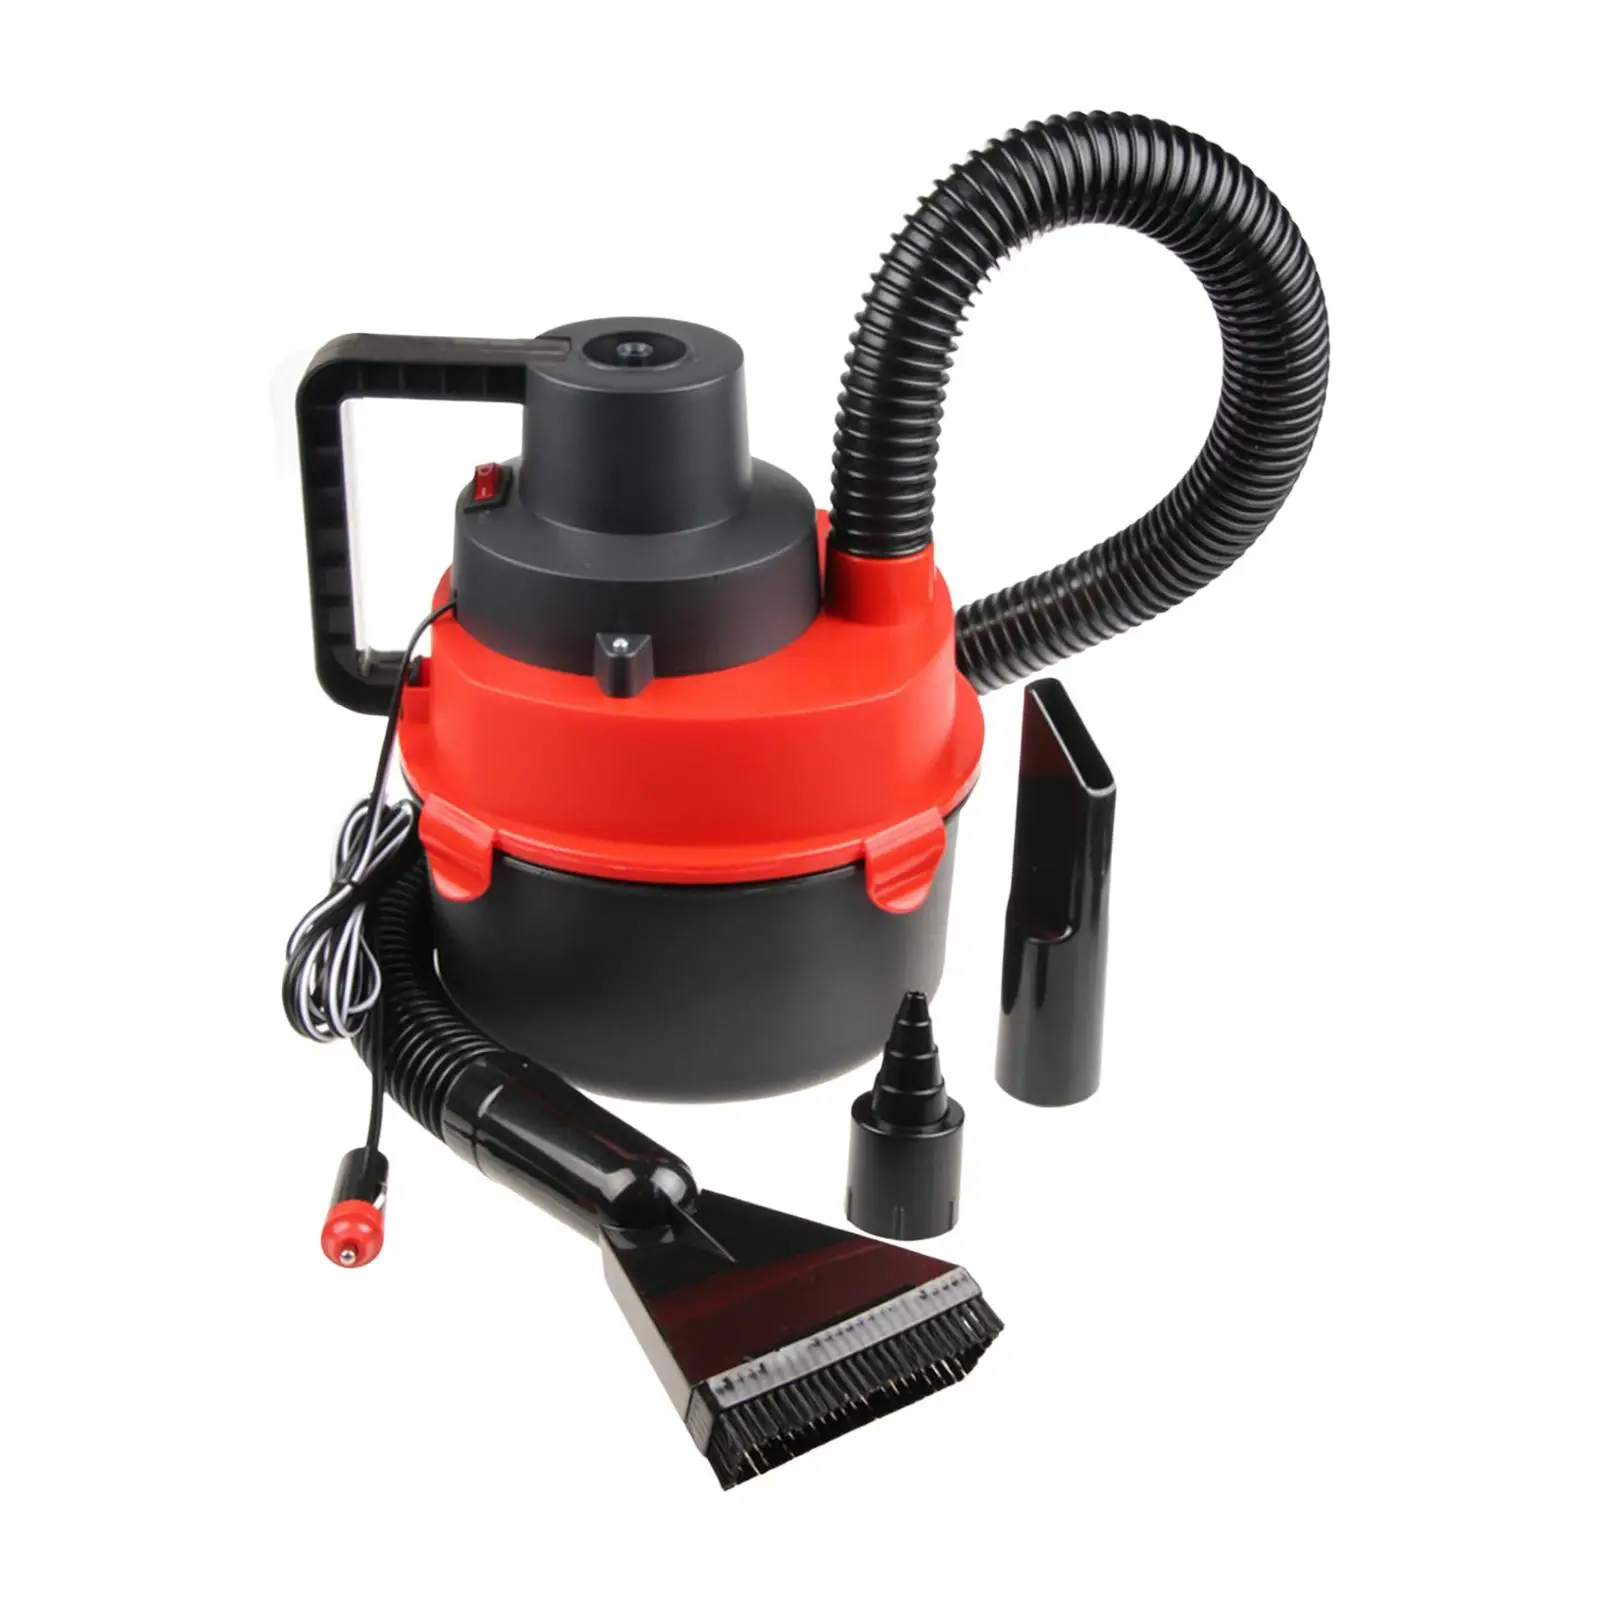 12V Wet/Dry Car Canister Vacuum Lightweight Interior Detailing Flexible 3ft Hose Wet or Dry Pickup Powerful Suction Portable VAC